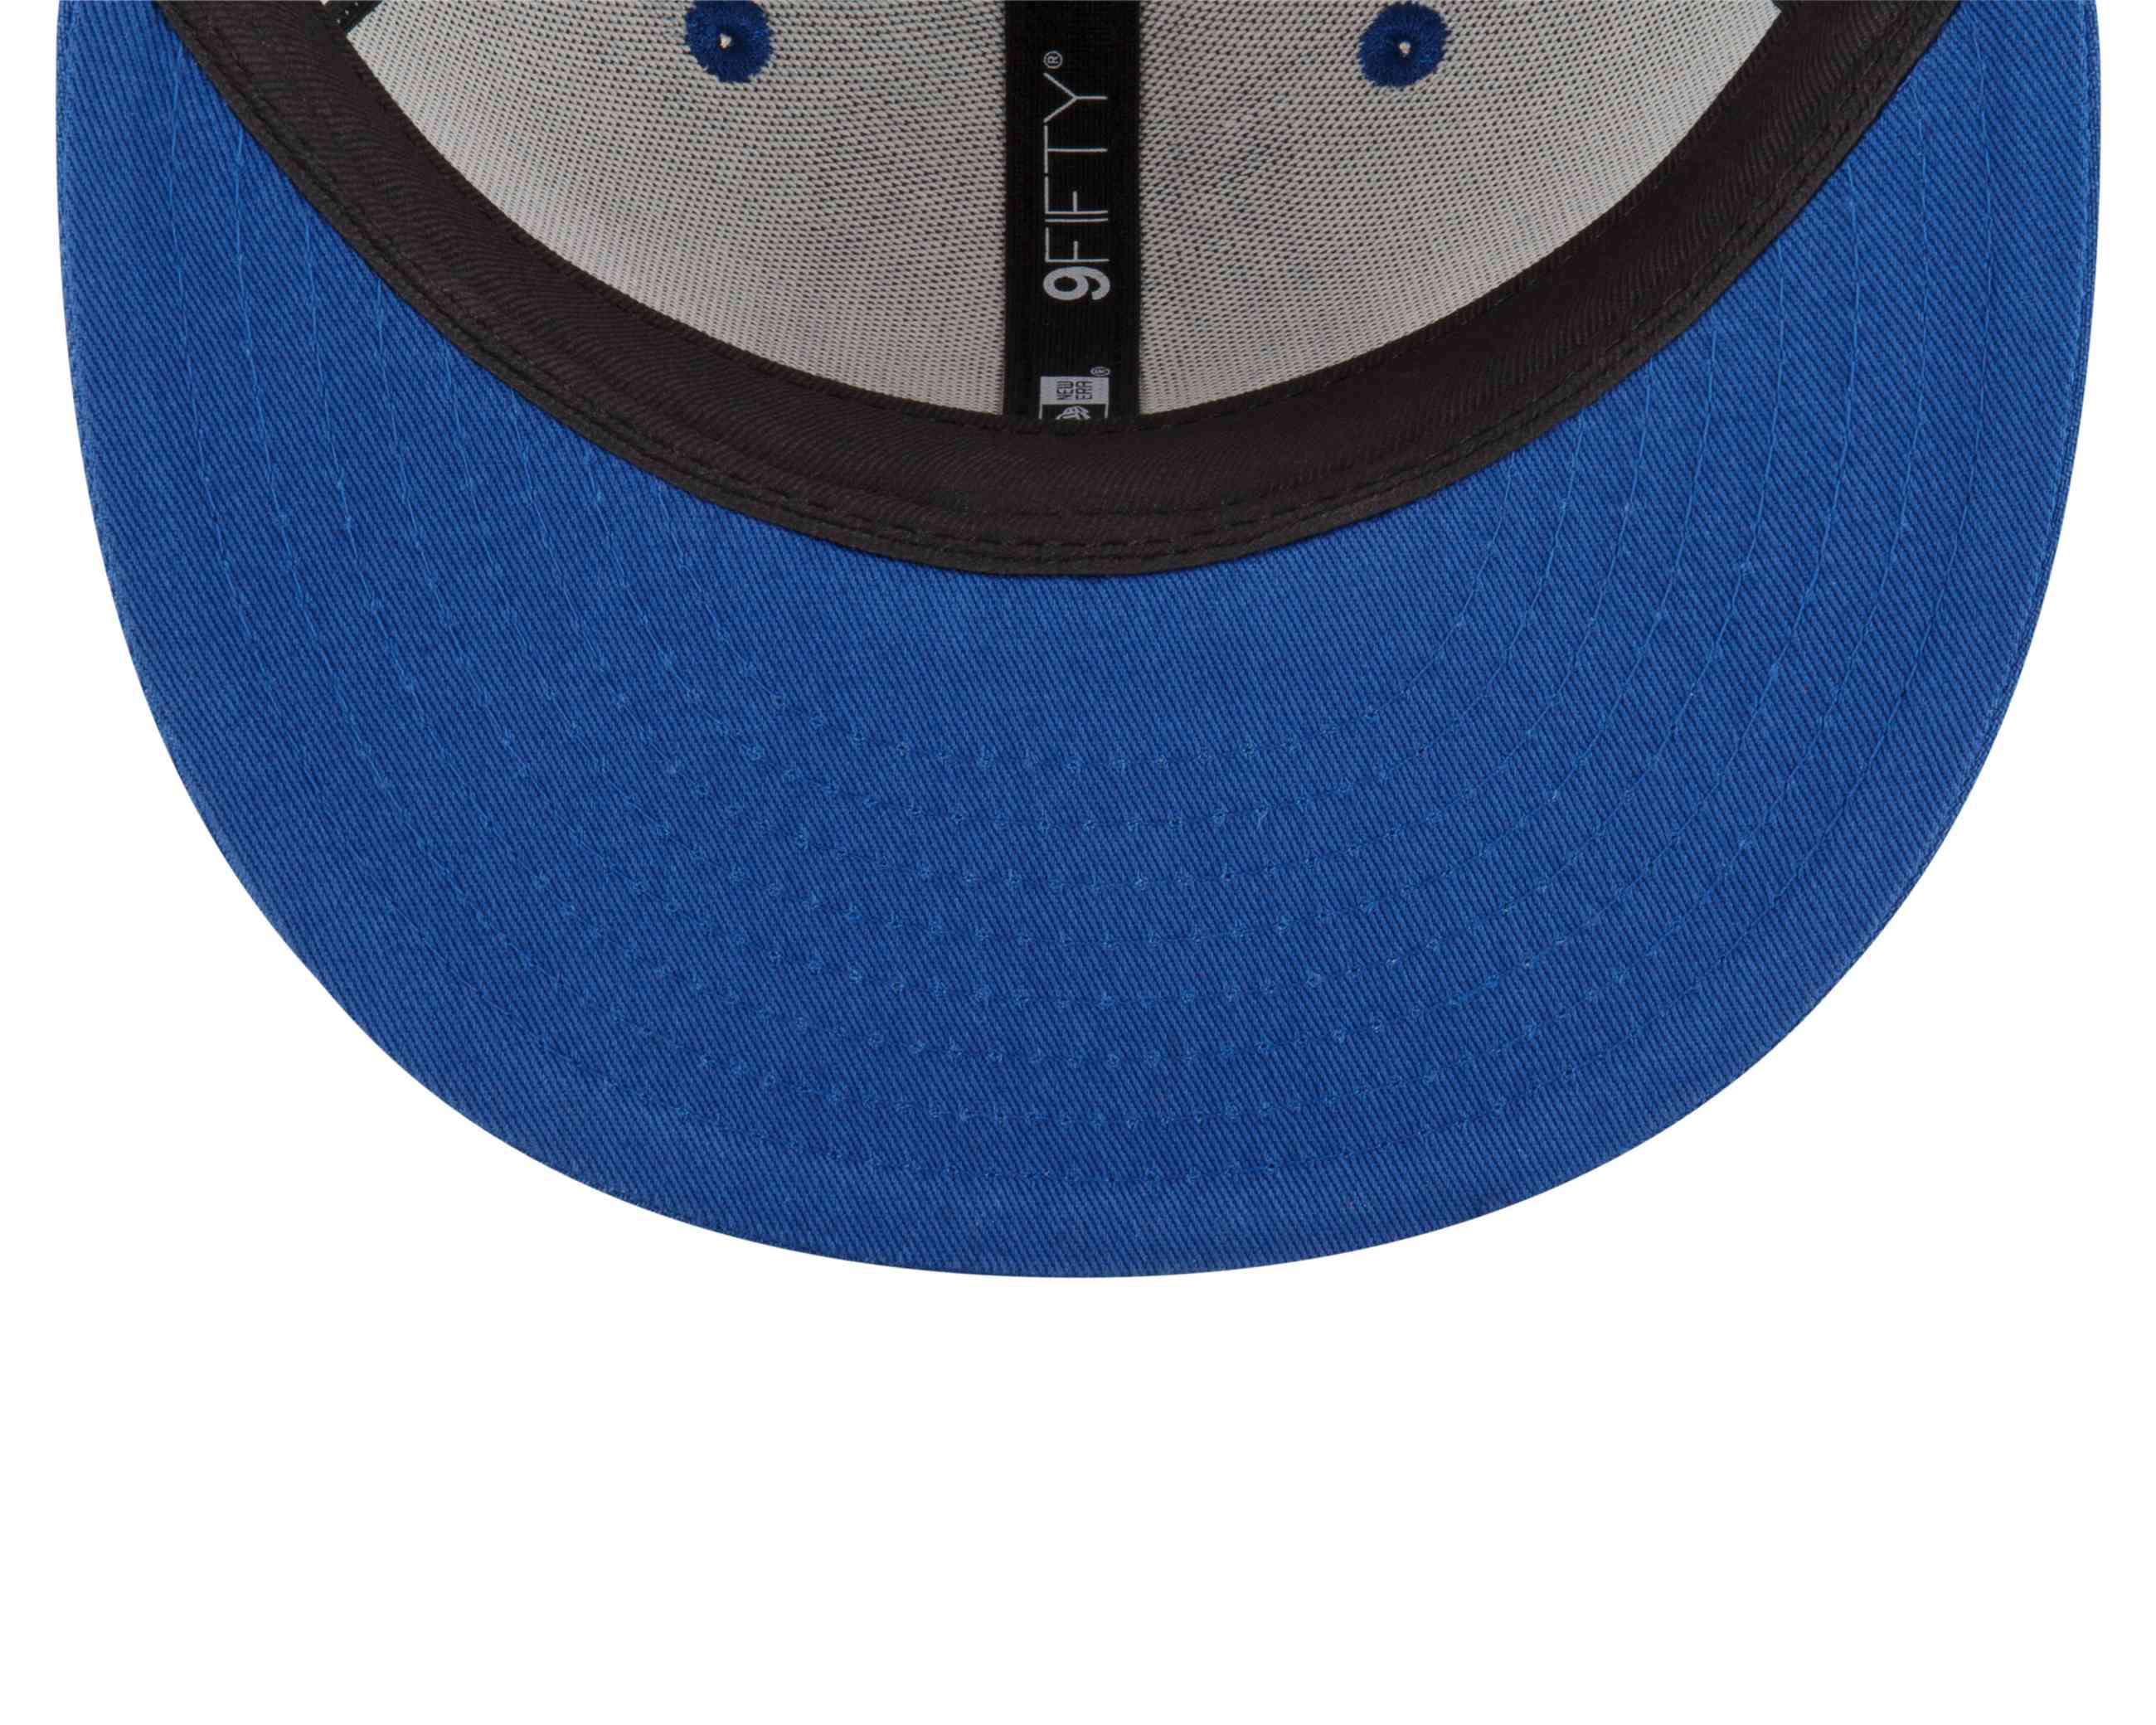 New Era - NFL Indianapolis Colts 2022 Sideline Ink 9Fifty Snapback Cap